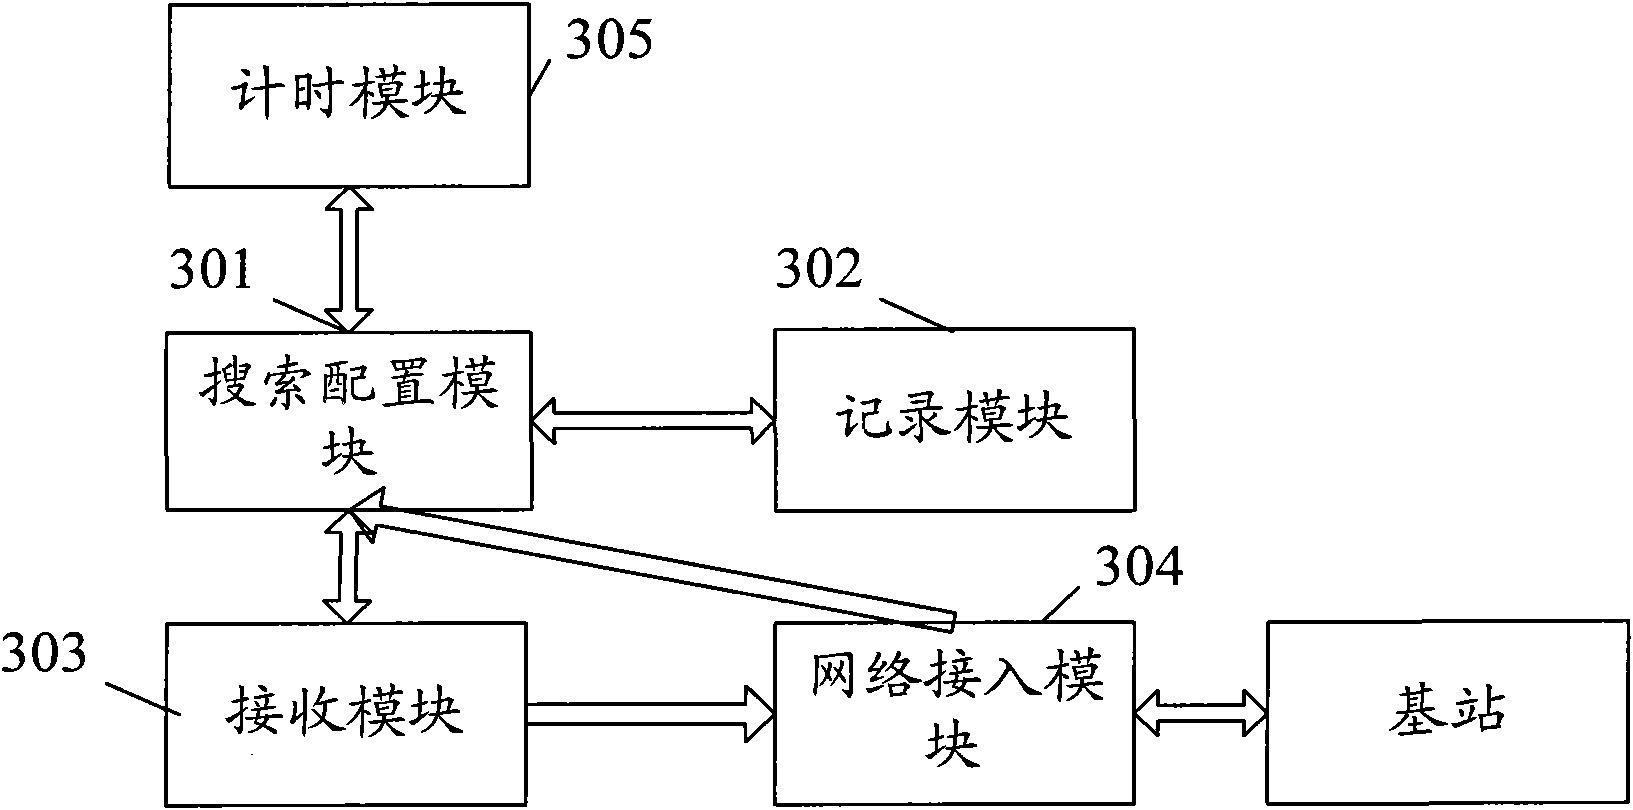 Method and device for switching different network systems